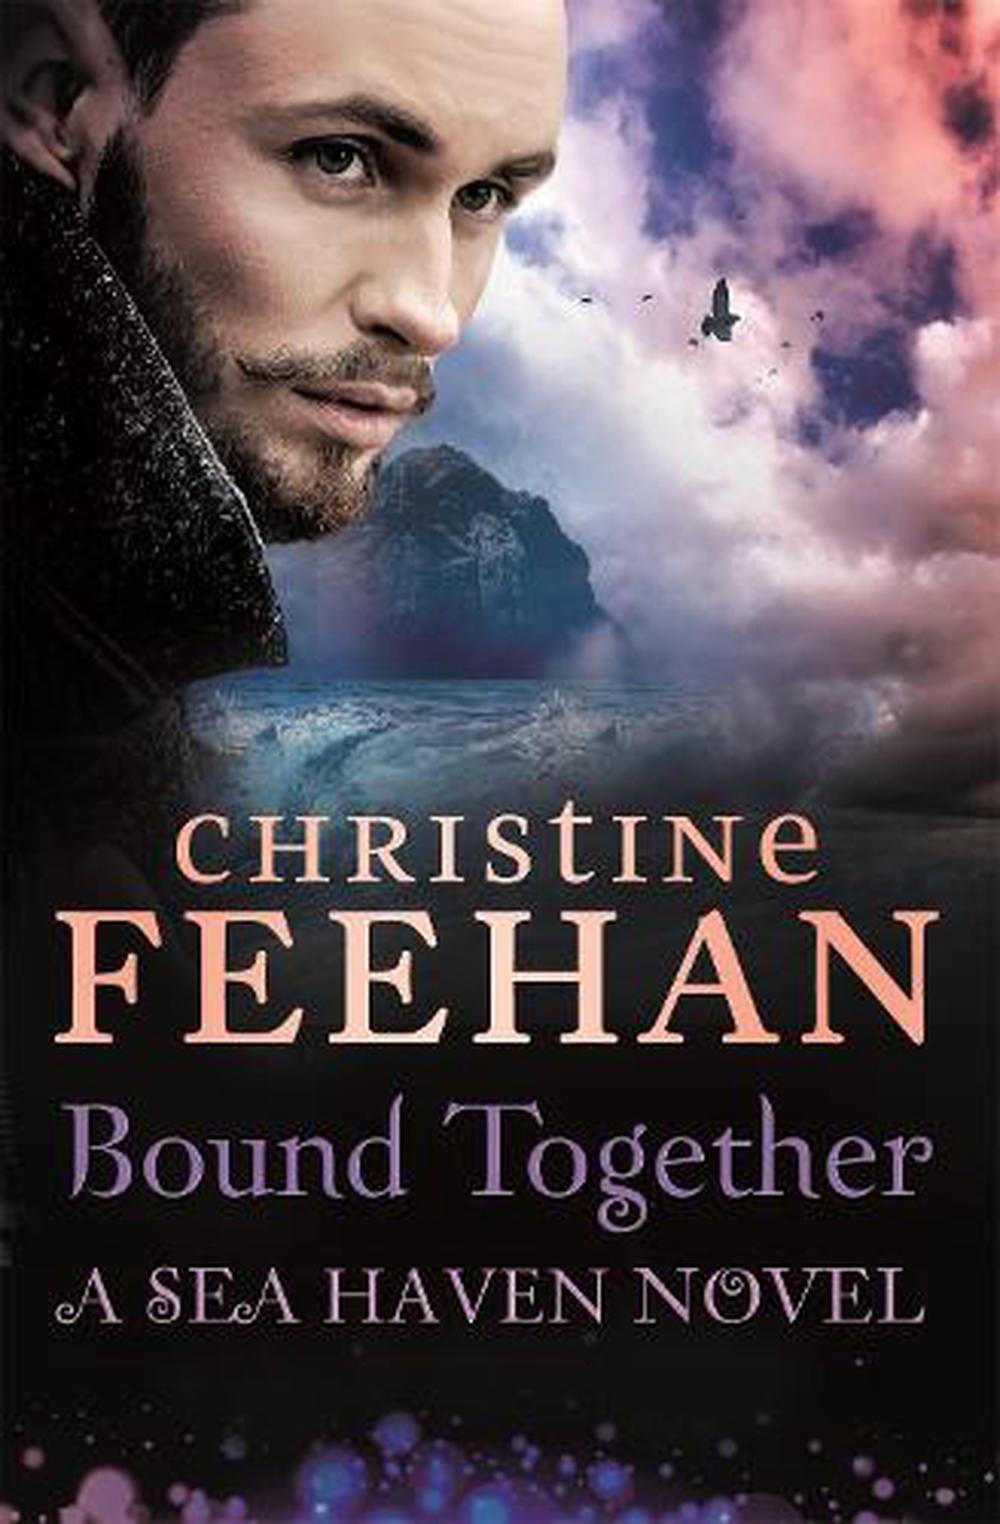 Bound Together by Christine Feehan, Paperback, 9780349416458 Buy